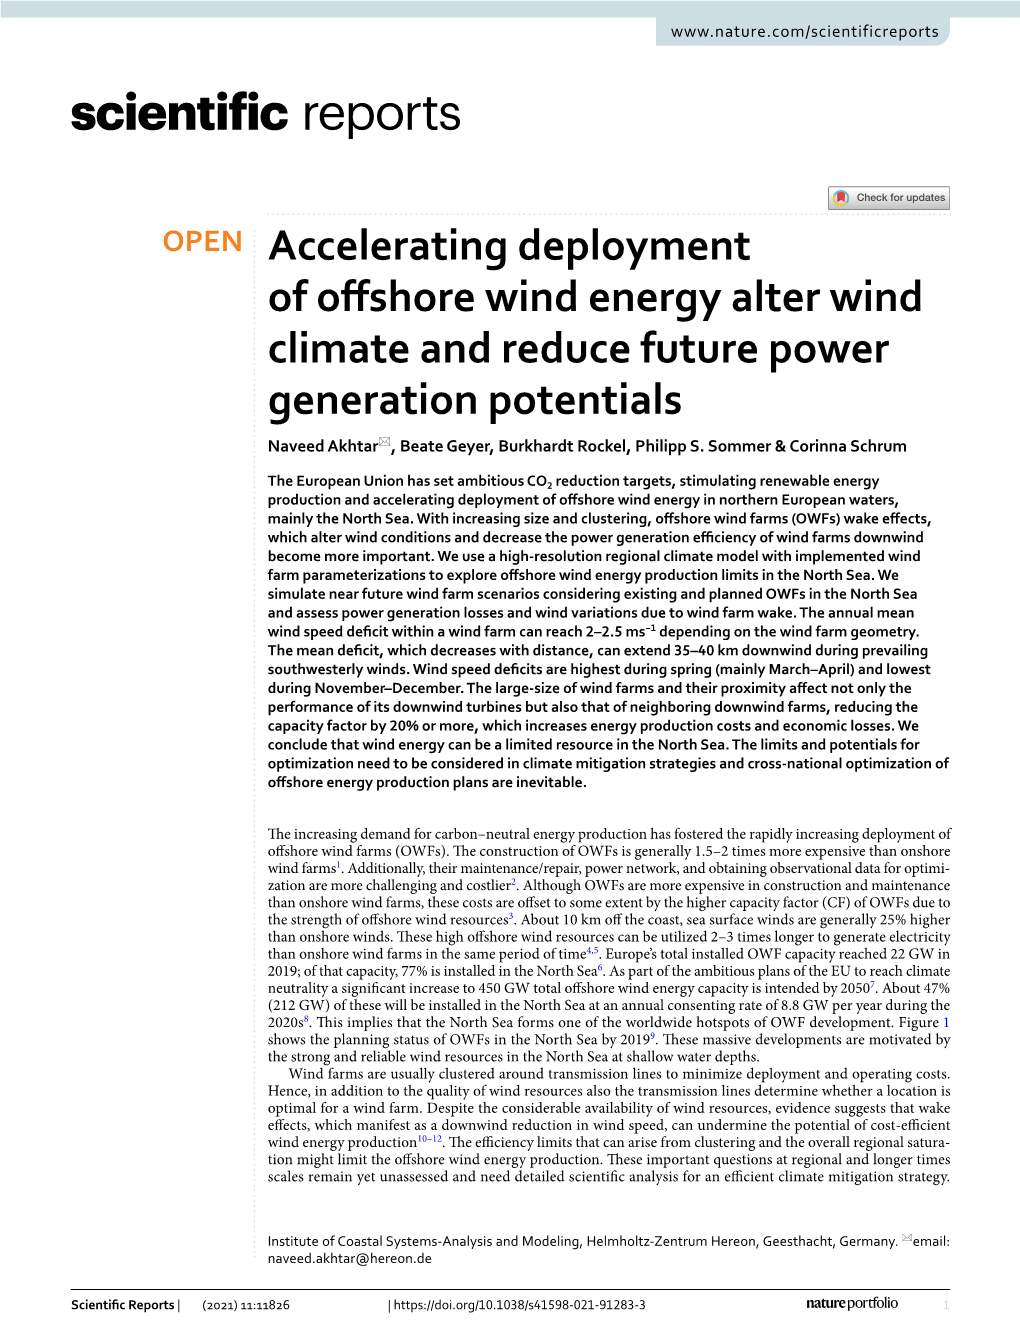 Accelerating Deployment of Offshore Wind Energy Alter Wind Climate And